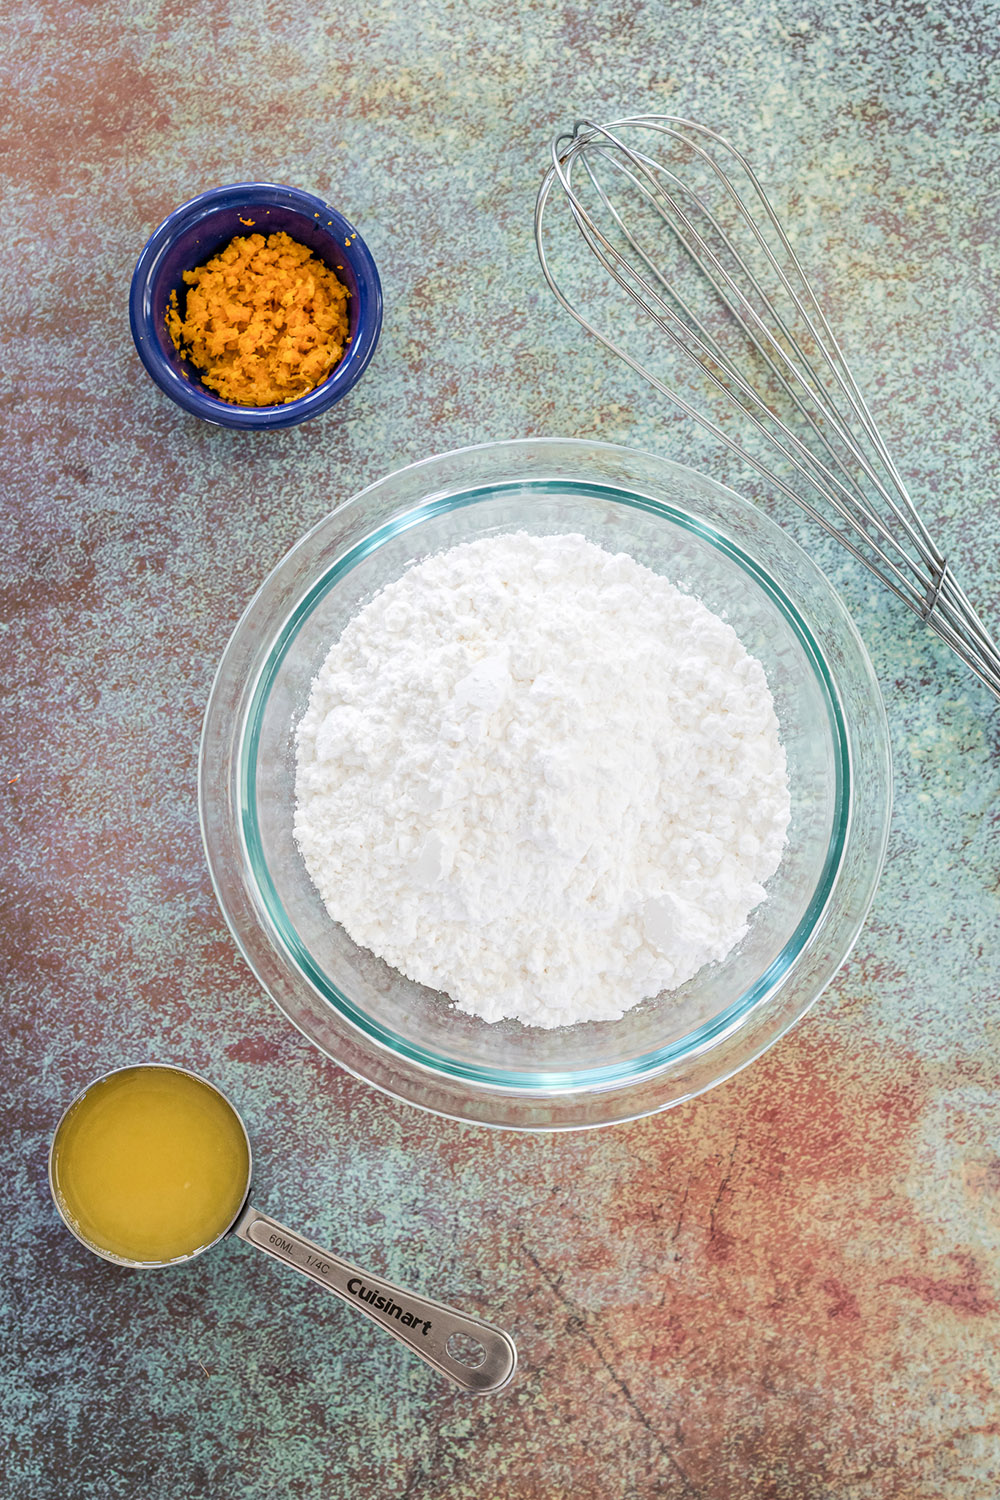 Powdered sugar, orange juice, and carrots in bowls.